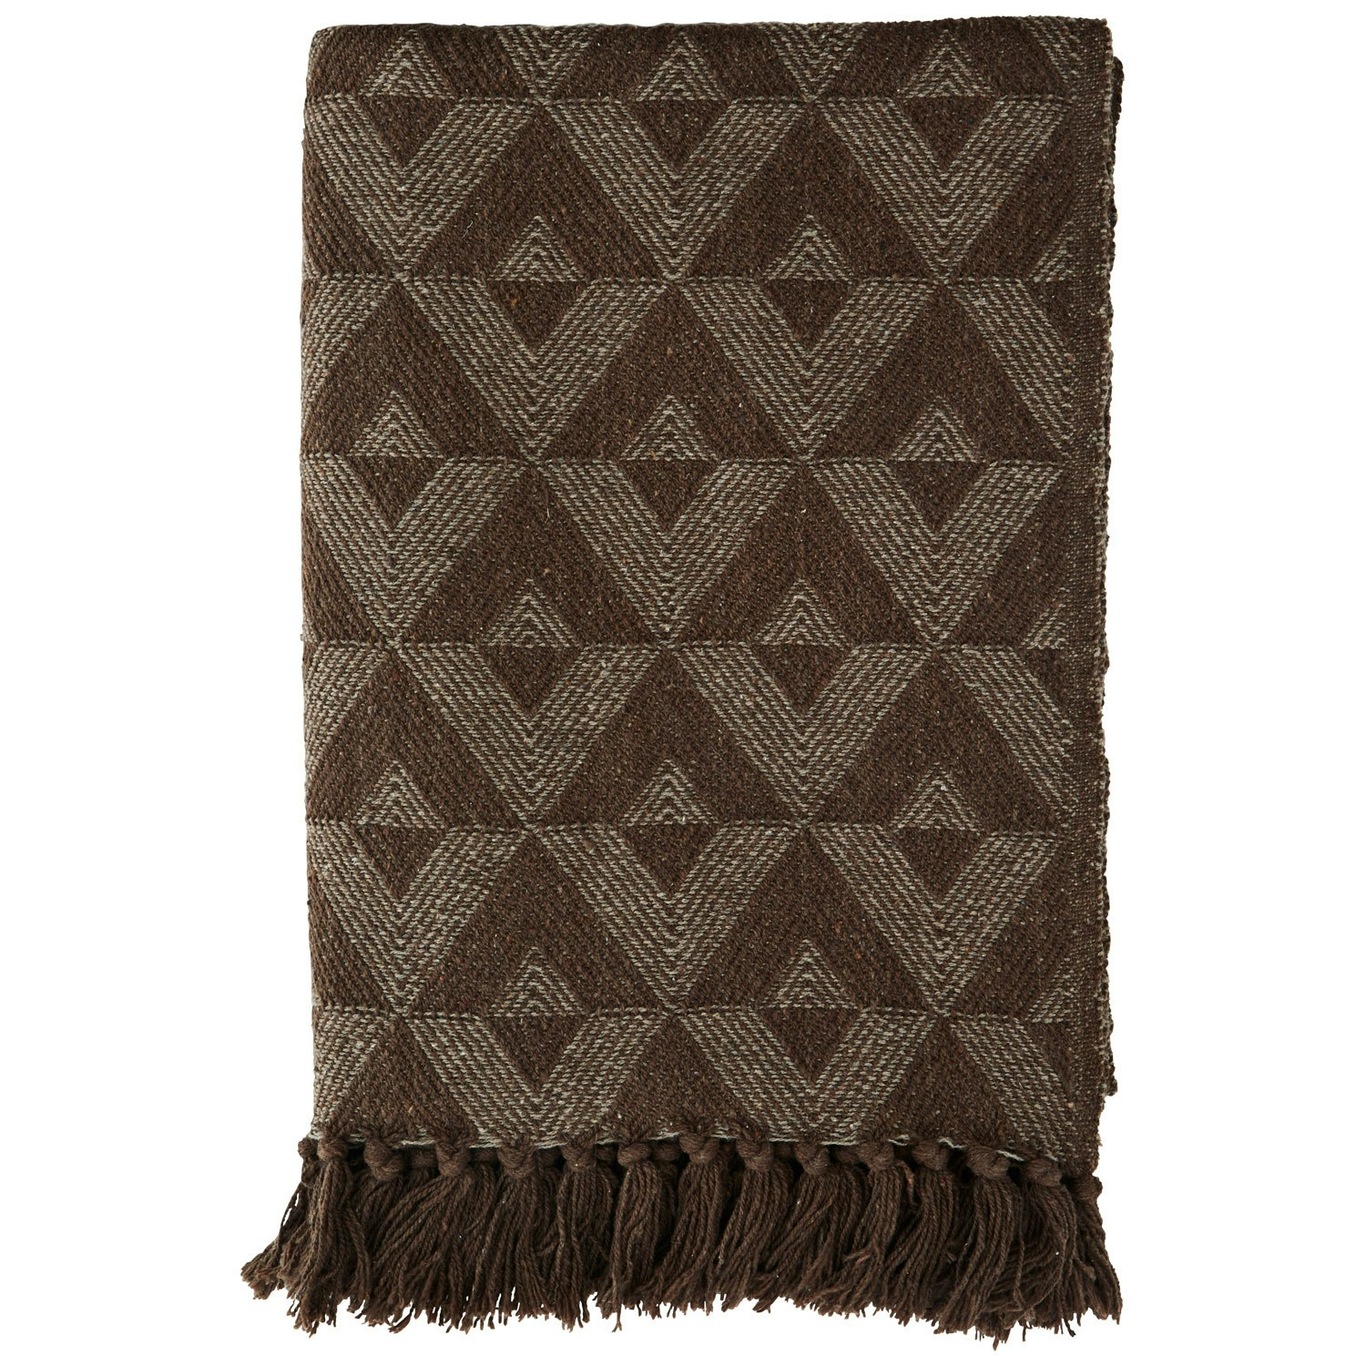 Throw Recycled Cotton 125x175 cm, Brown